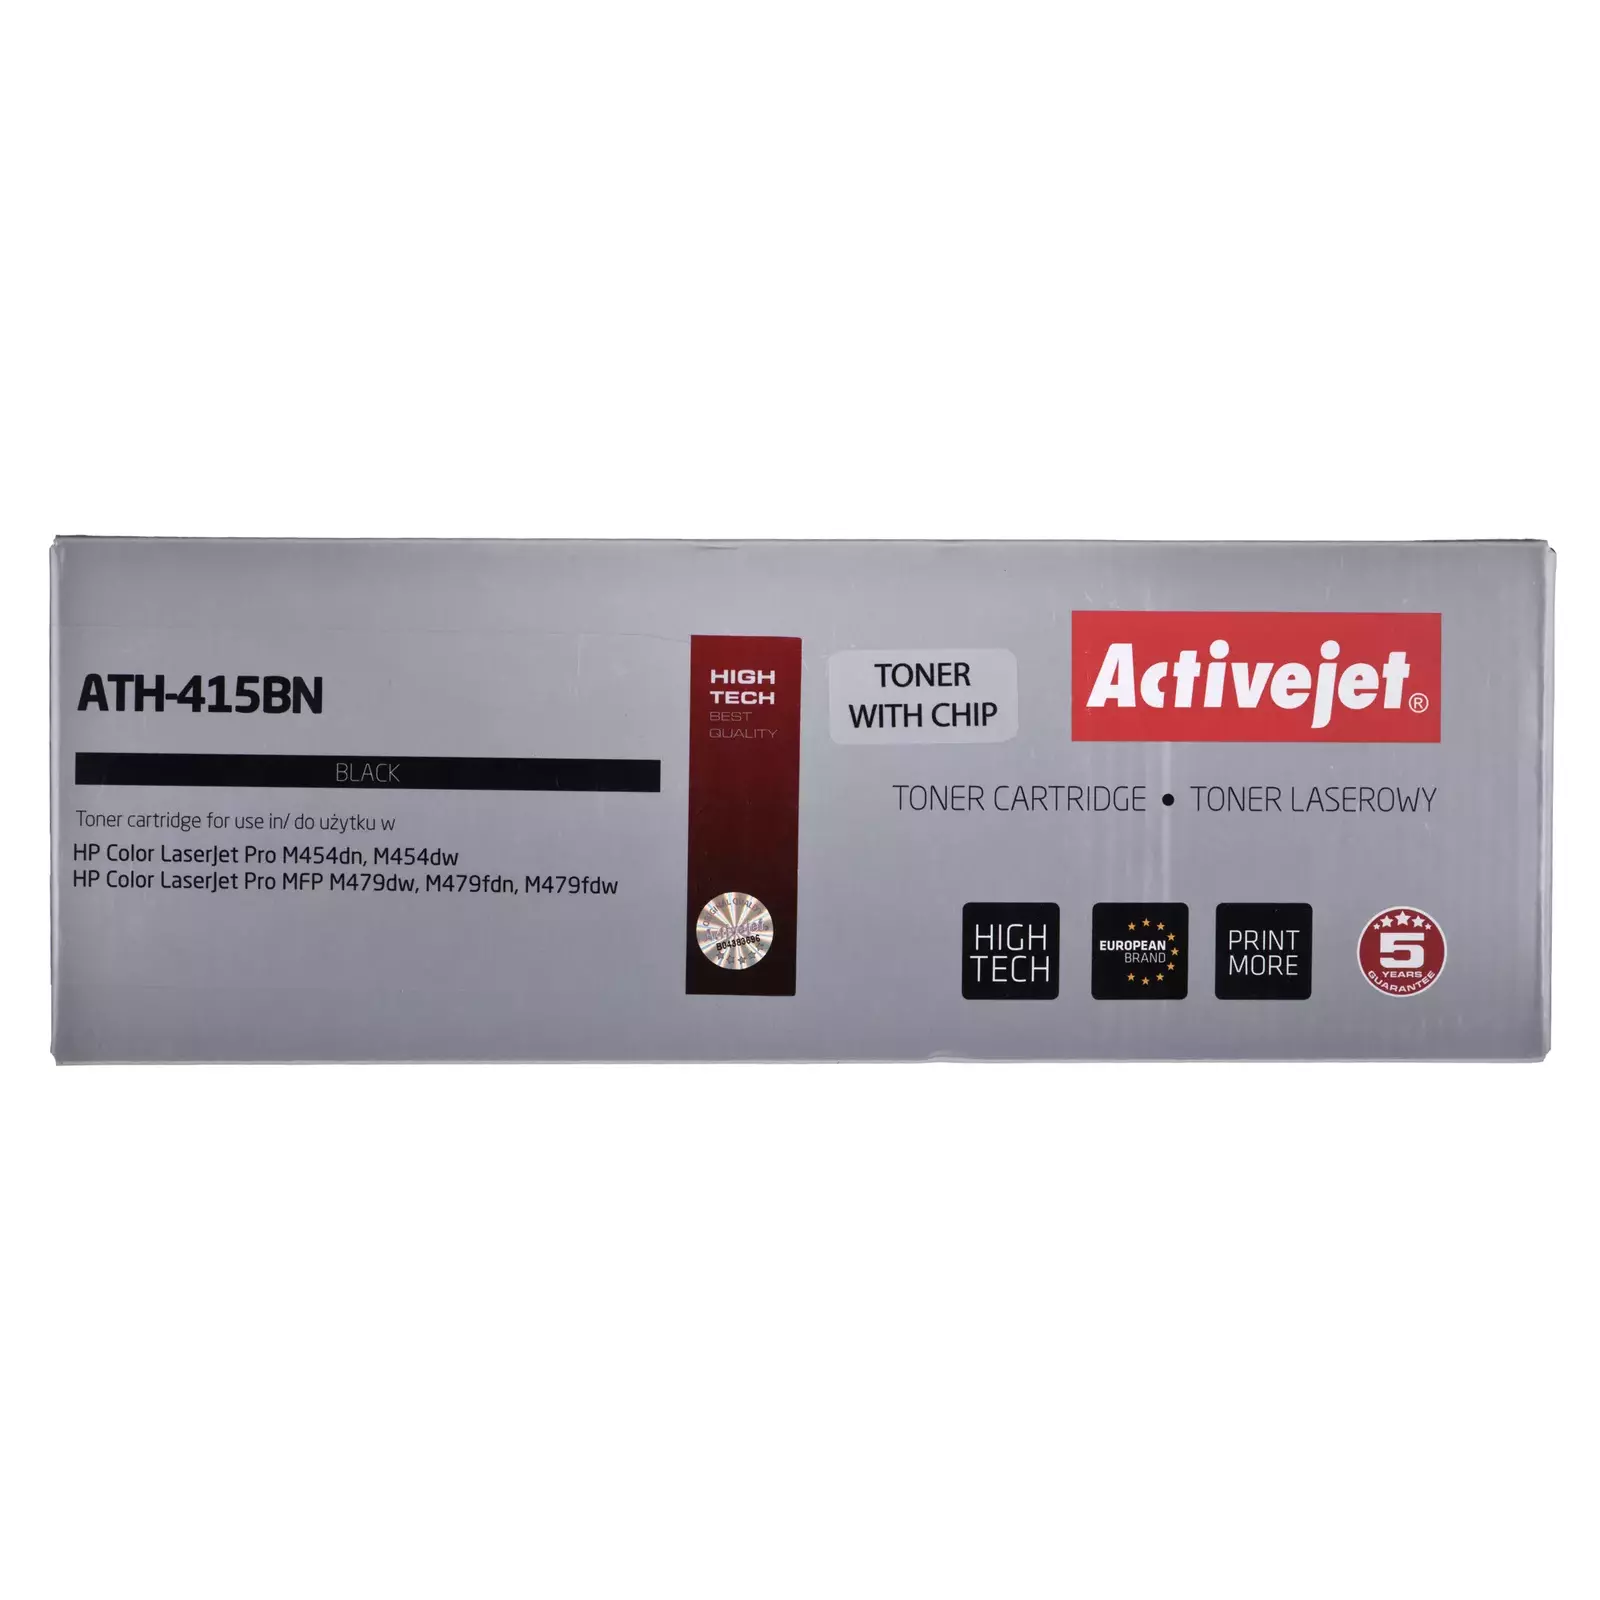 ActiveJet ATH-415BN CHIP Photo 2